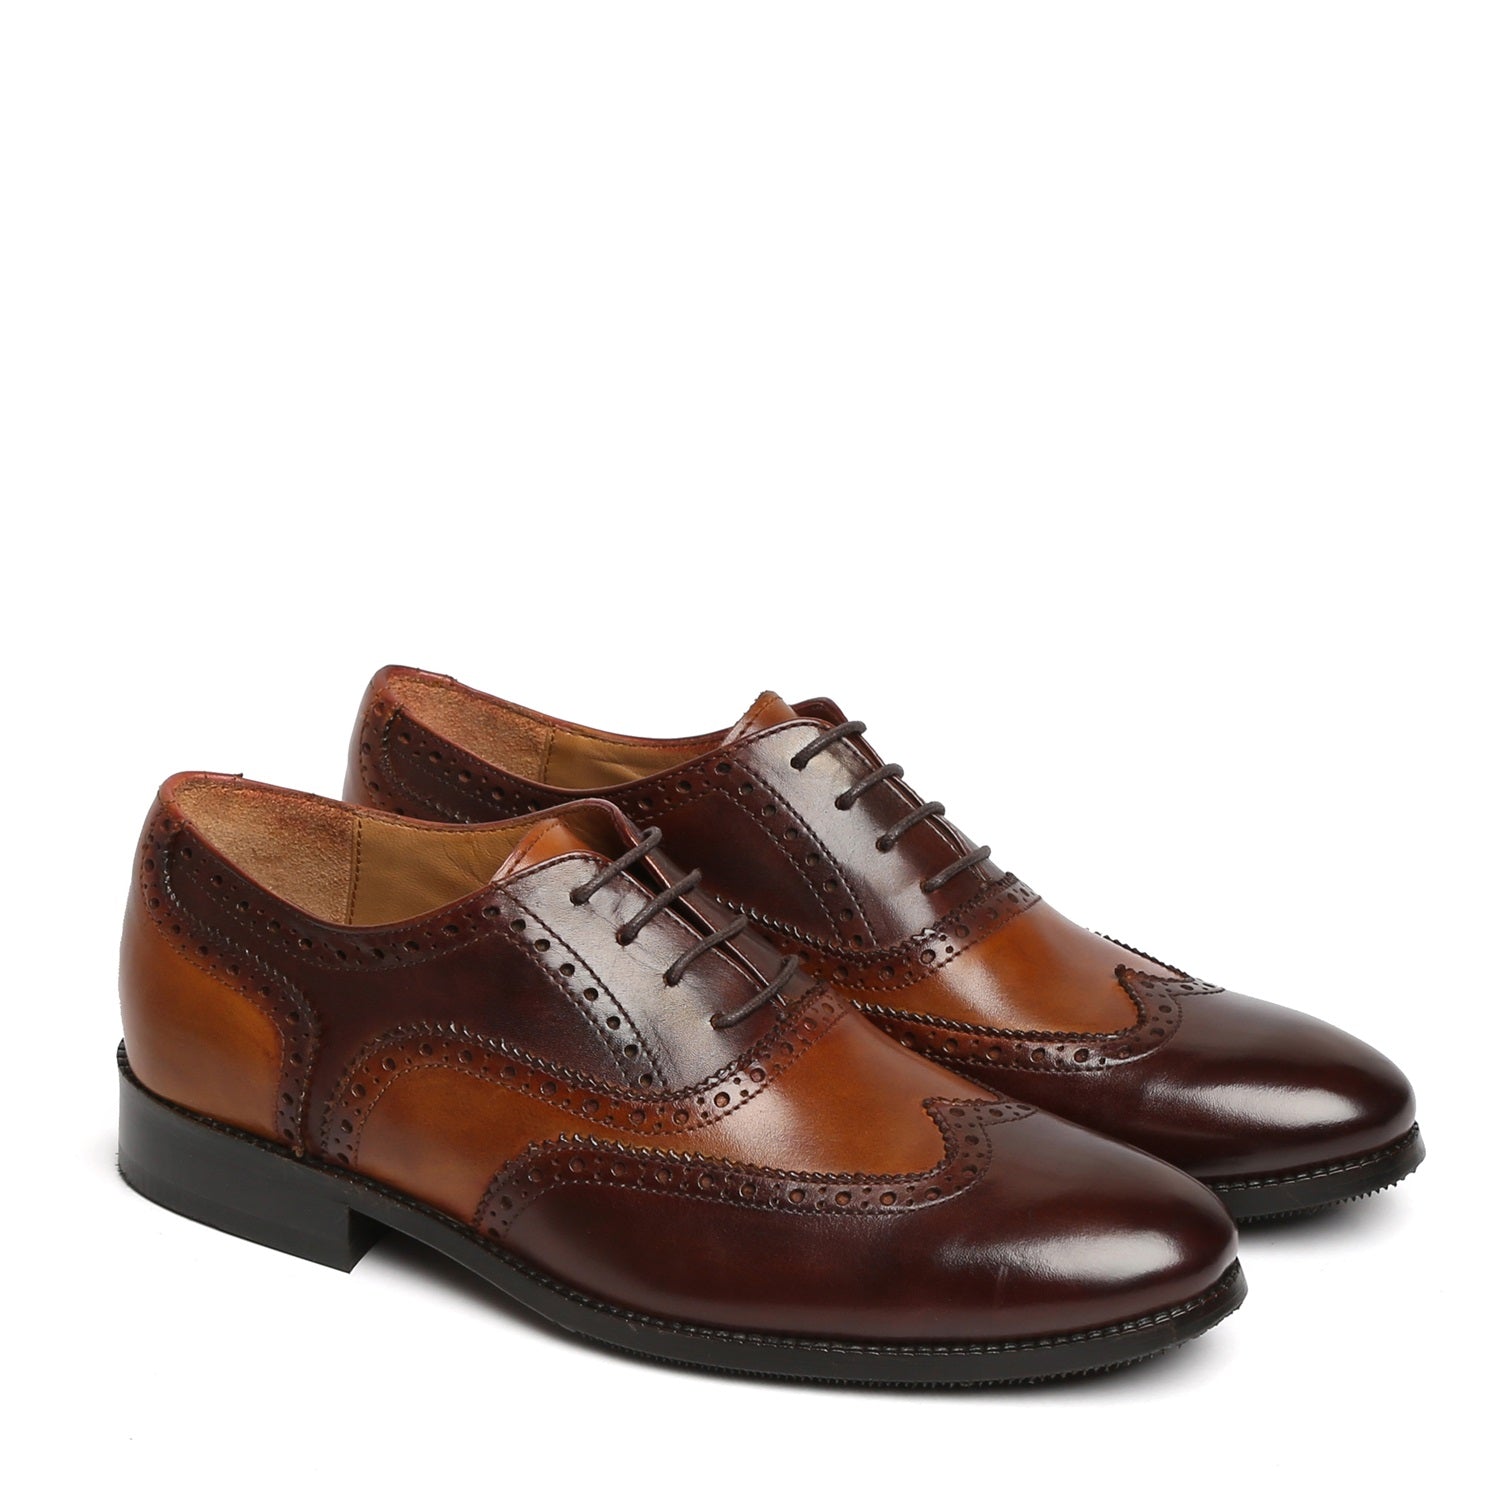 Tan-Brown Leather Shoe with Punching Brogue Oxford Lace-Up Closure